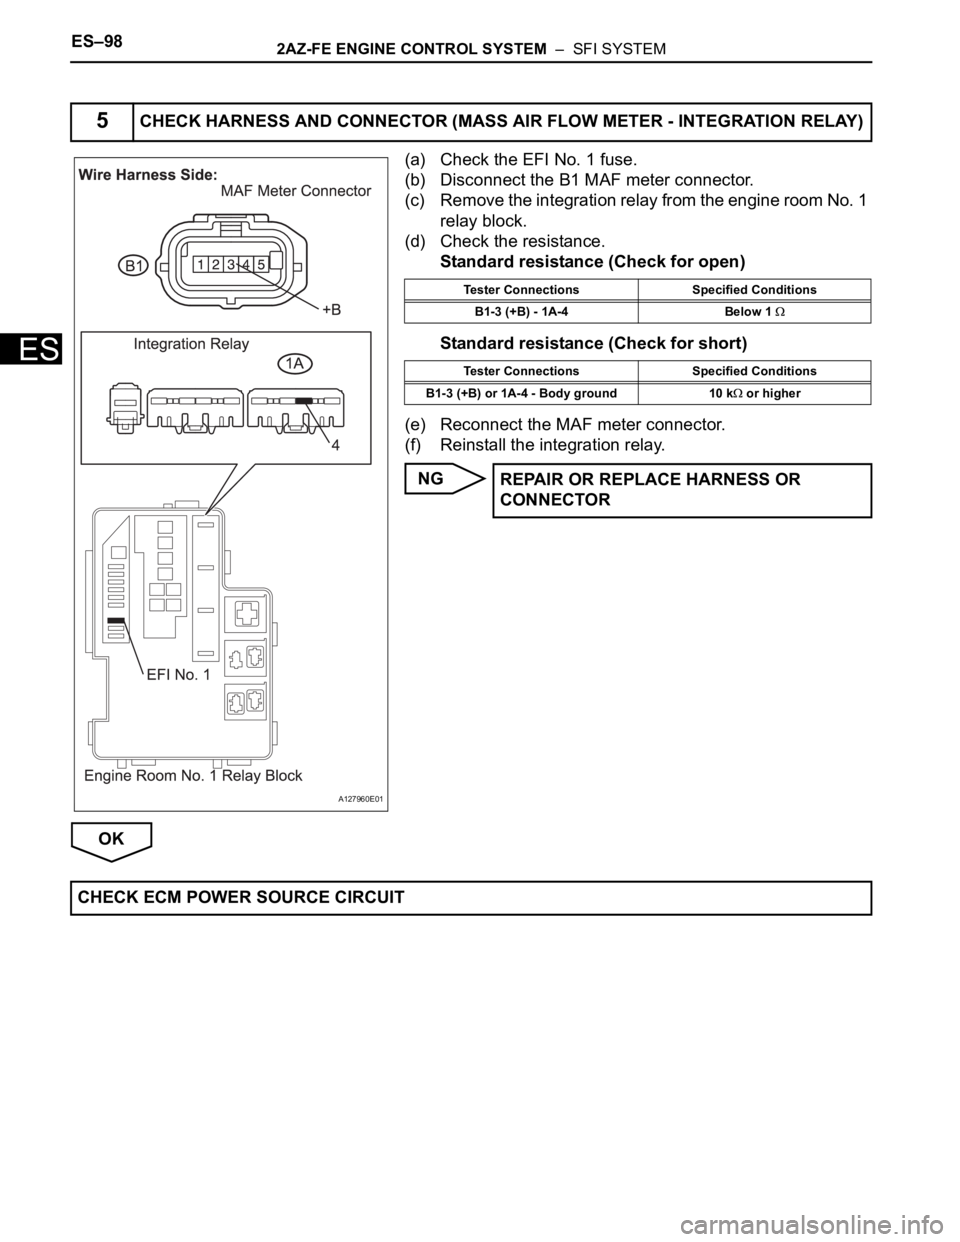 TOYOTA RAV4 2006  Service Repair Manual ES–982AZ-FE ENGINE CONTROL SYSTEM  –  SFI SYSTEM
ES
(a) Check the EFI No. 1 fuse.
(b) Disconnect the B1 MAF meter connector.
(c) Remove the integration relay from the engine room No. 1 
relay bloc